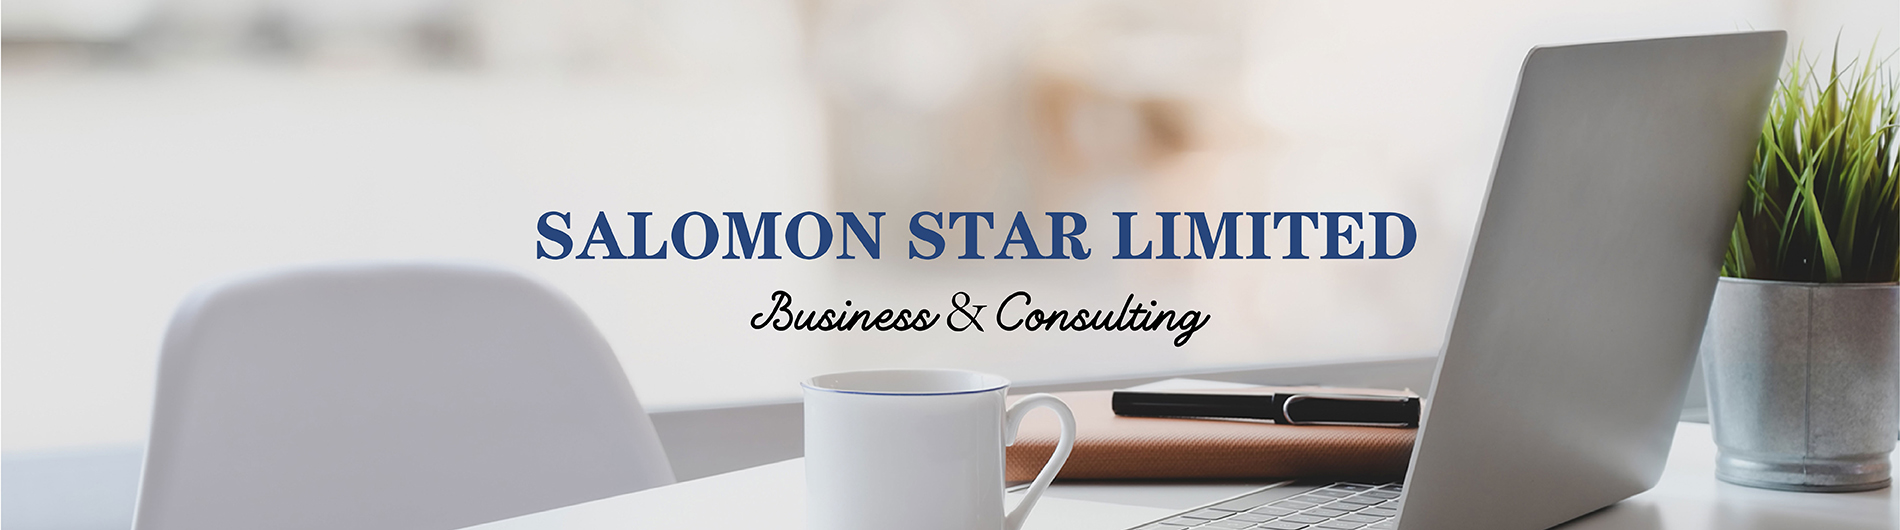 Salomon star Limited is professional trading company in China.